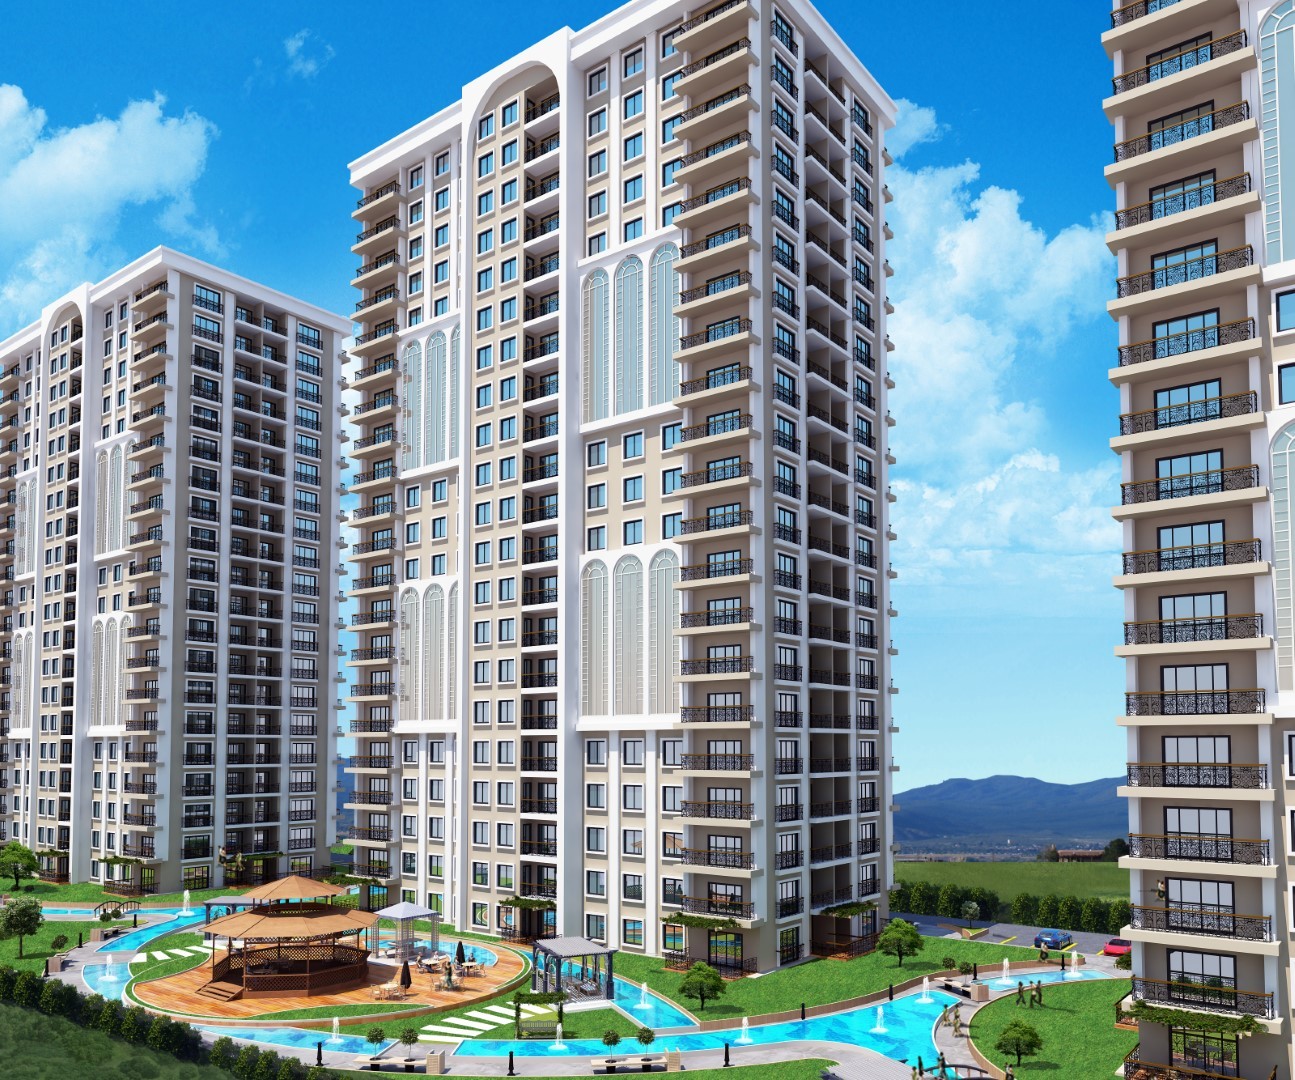 Modern apartments with smart technology for investment & living Istanbul